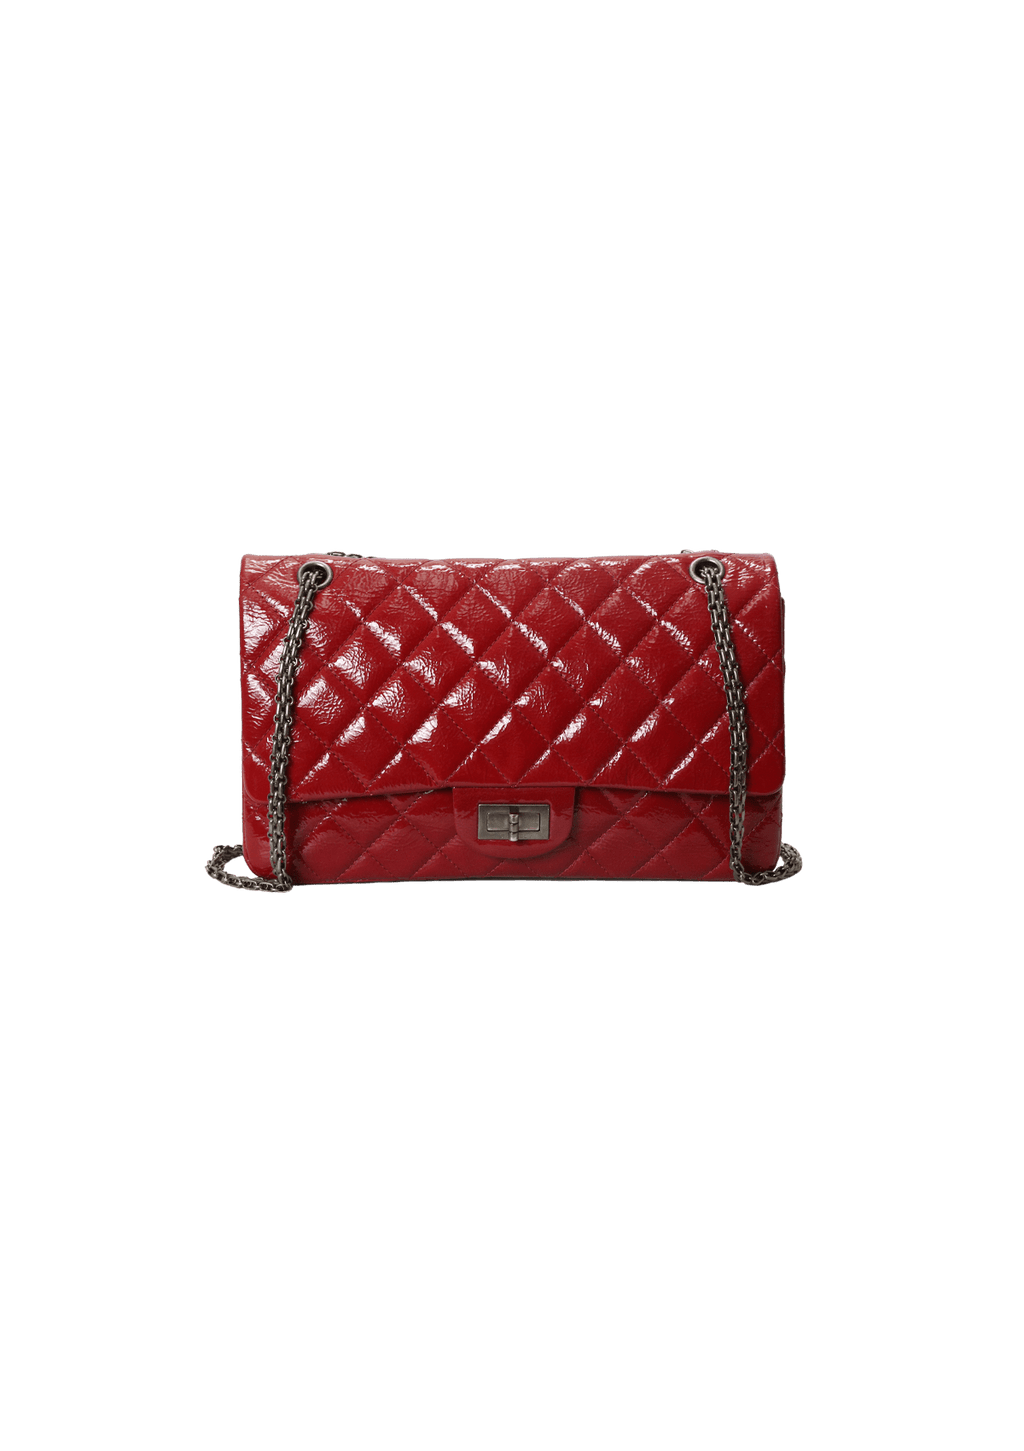 Chanel 12144738 Reissue 2.55 Patent Leather Red Puzzle Medium 28cm Gold  Hardware - The Attic Place